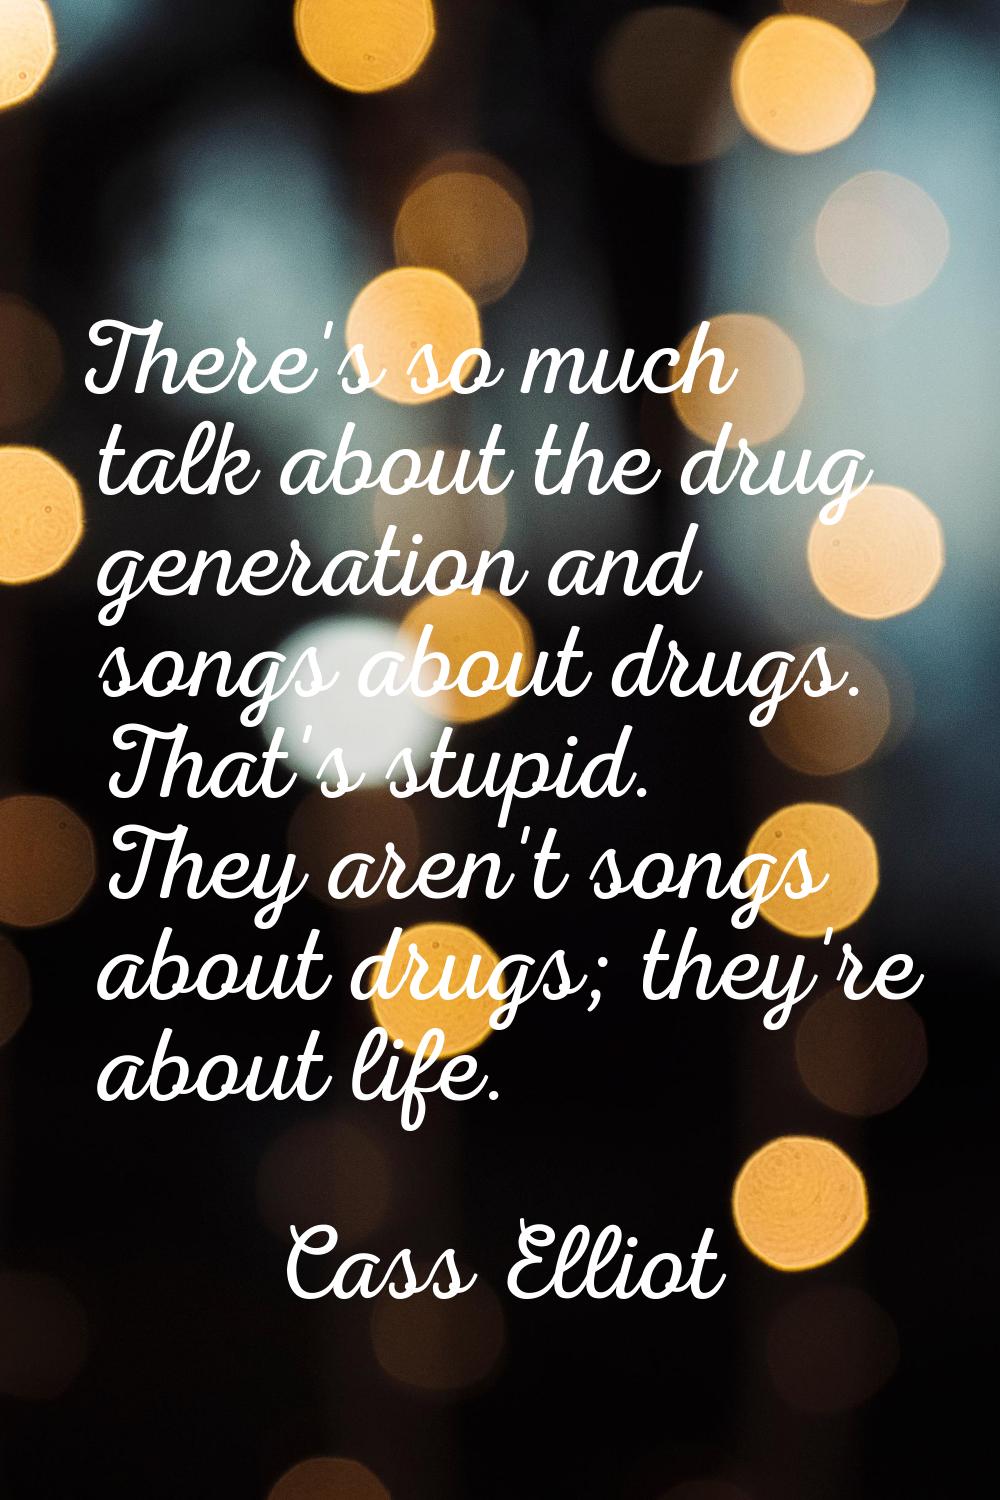 There's so much talk about the drug generation and songs about drugs. That's stupid. They aren't so